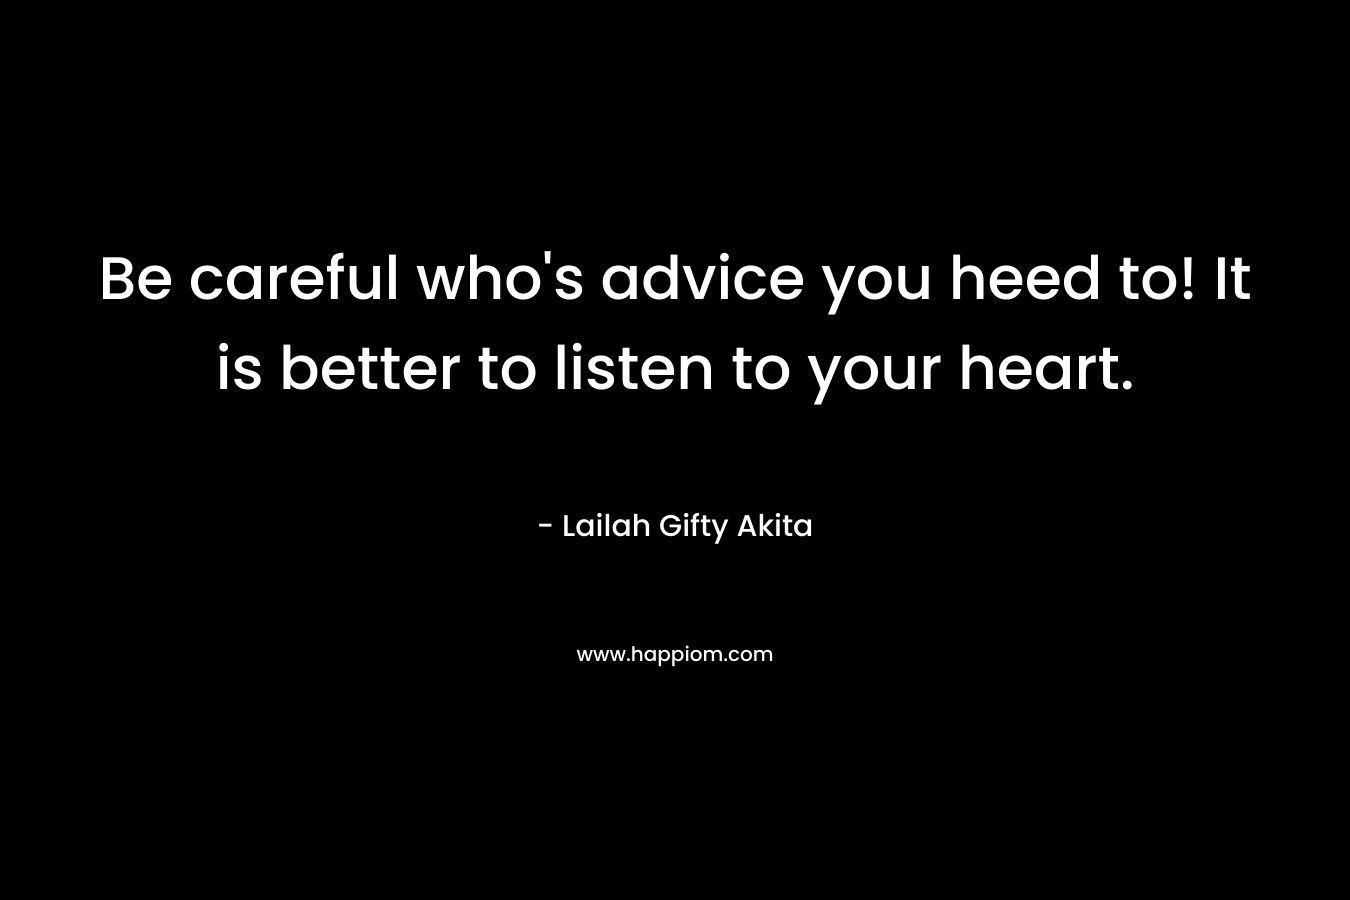 Be careful who's advice you heed to! It is better to listen to your heart.